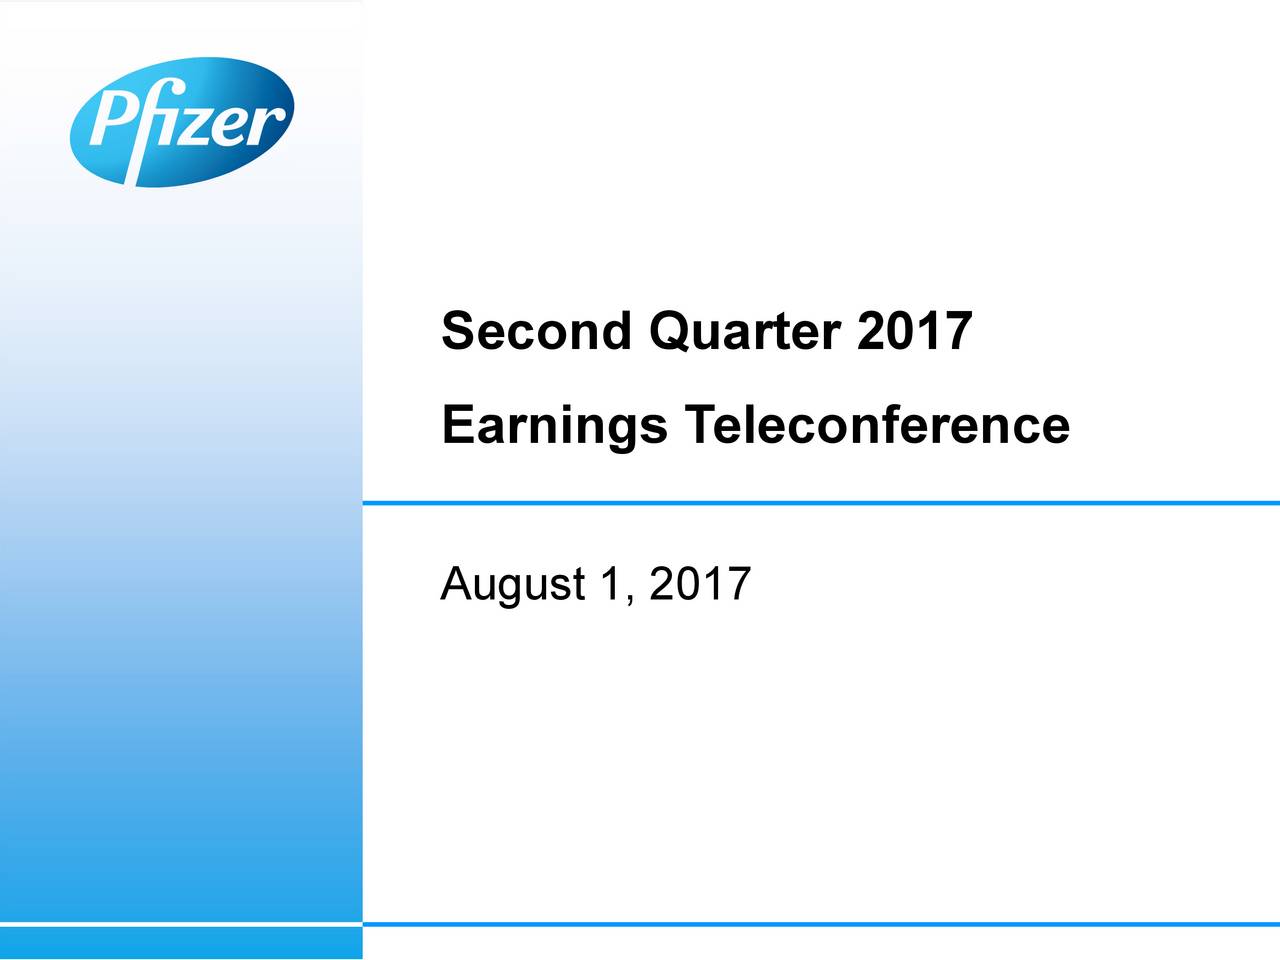 Earnings Teleconference August 1, 2017